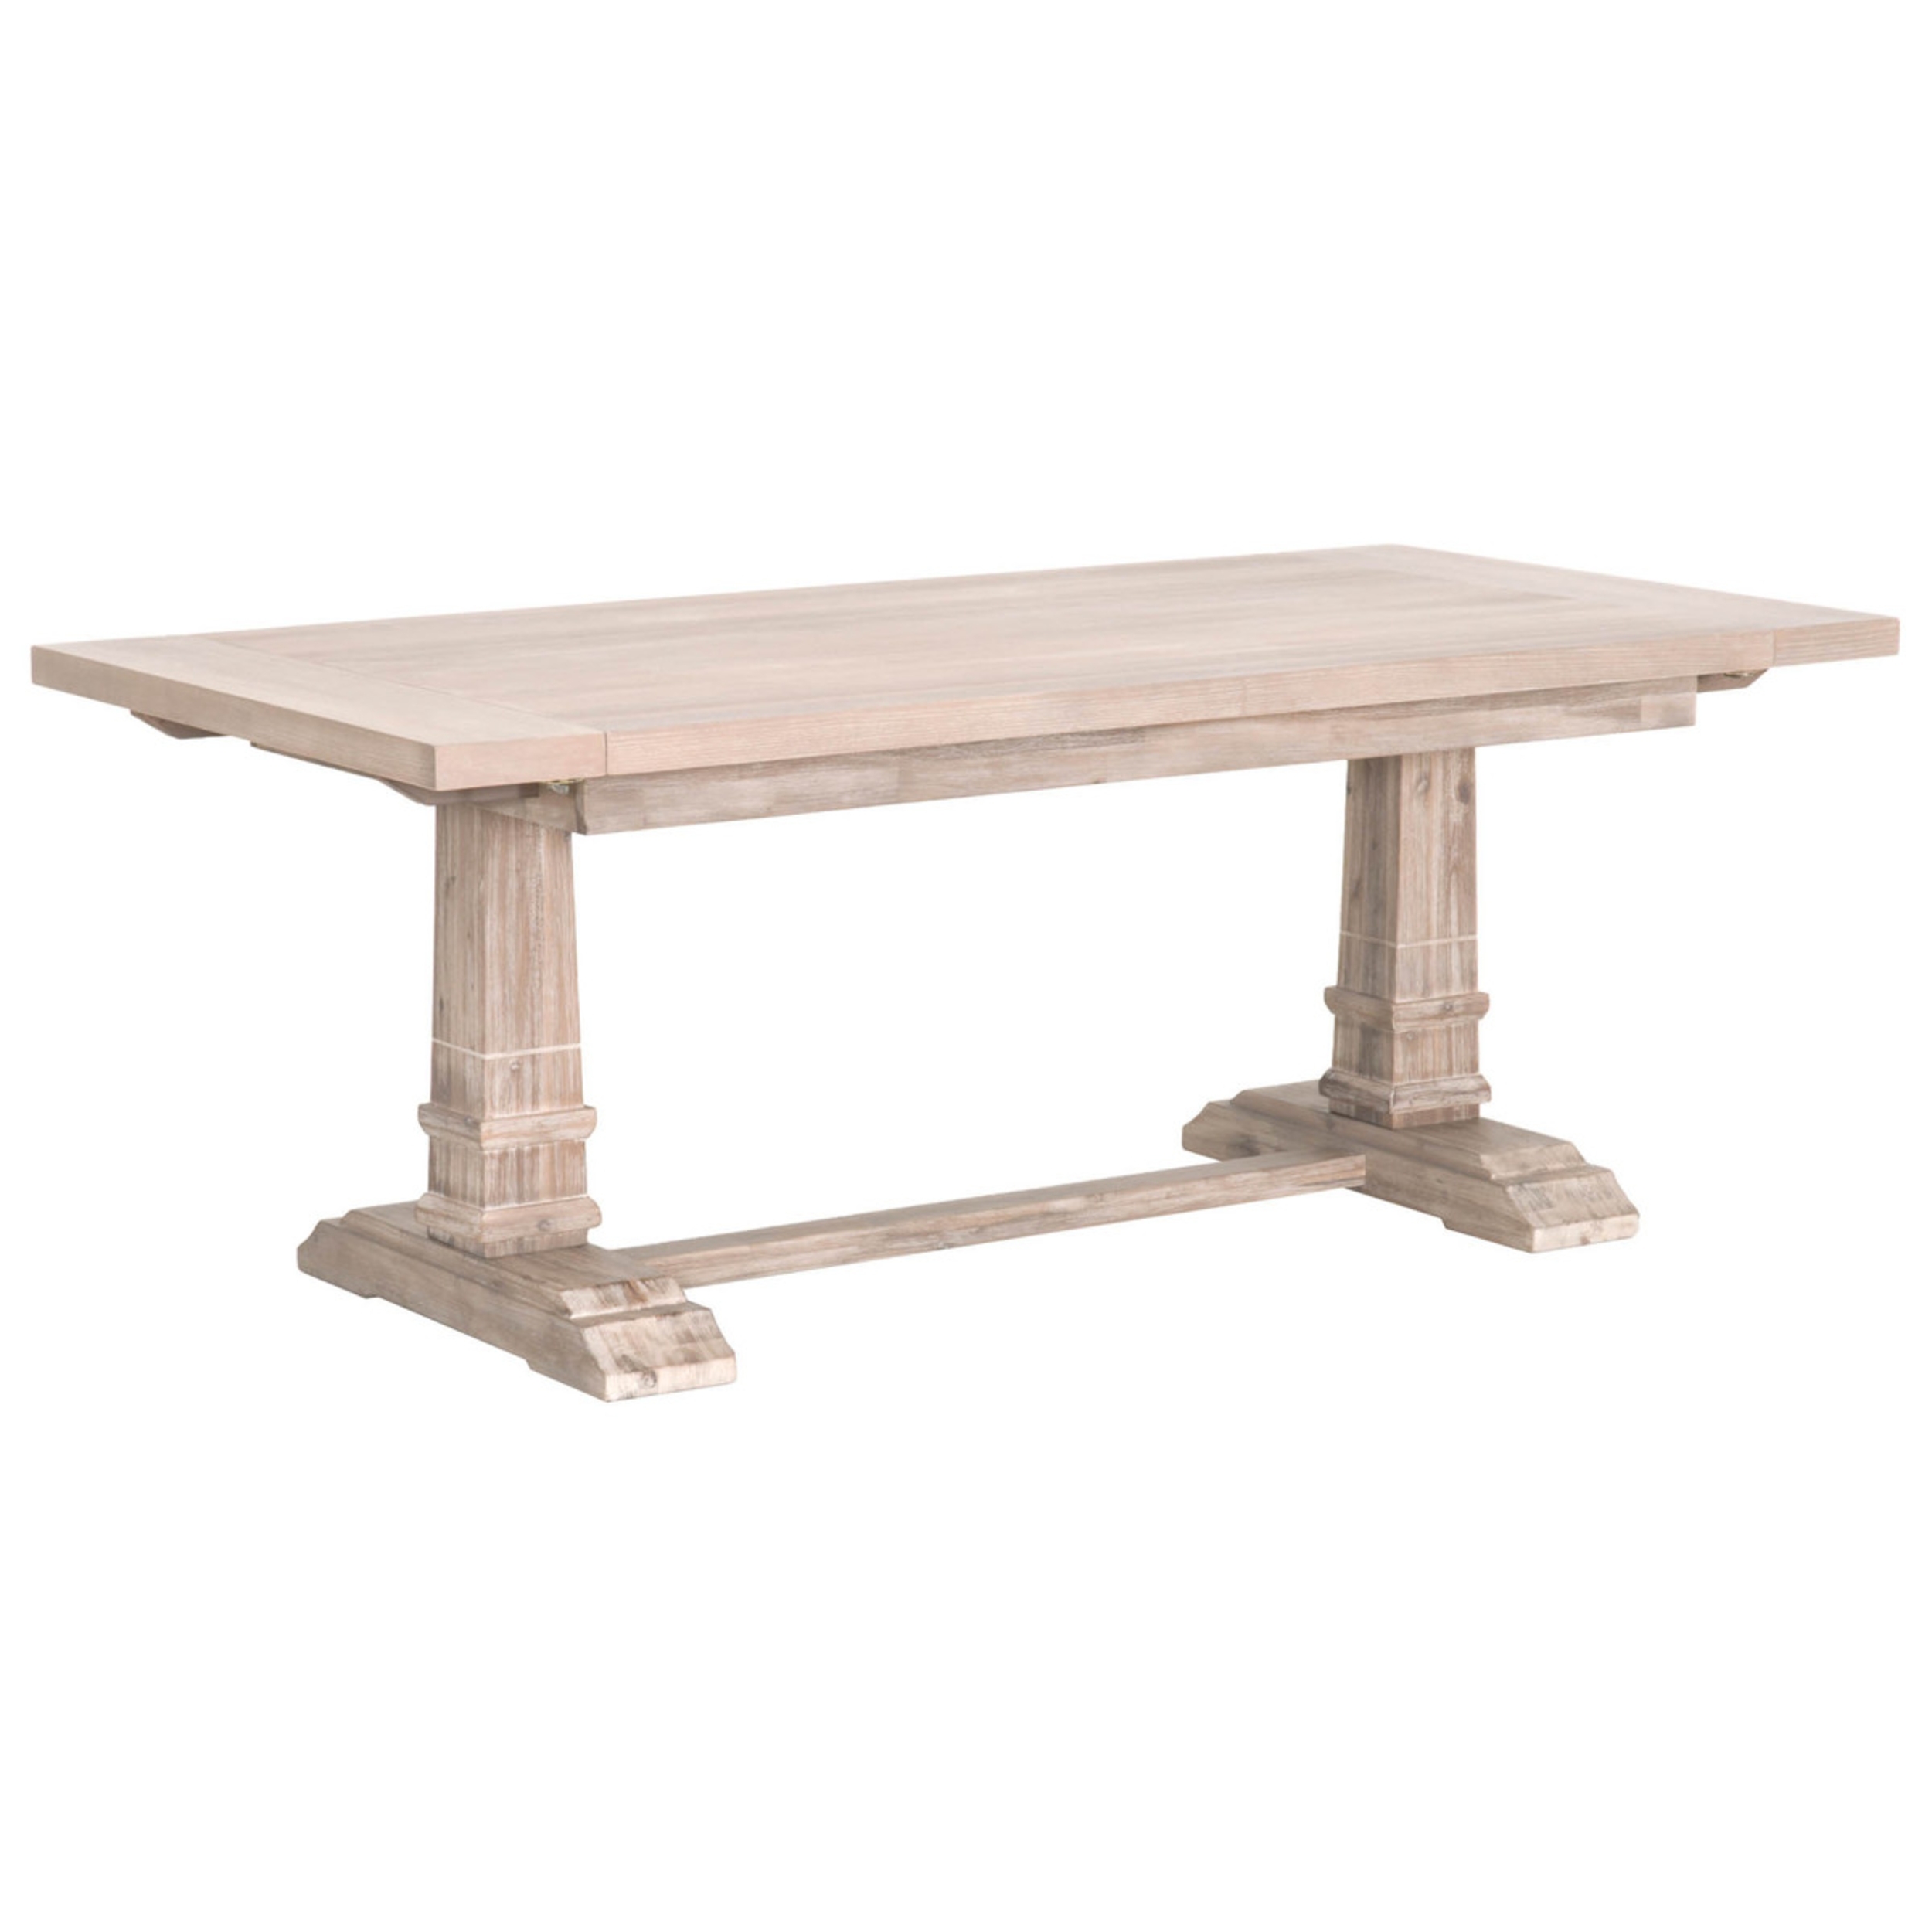 Julian French Country Brown Wood Trestle Dining Table - Extendable - Image 1